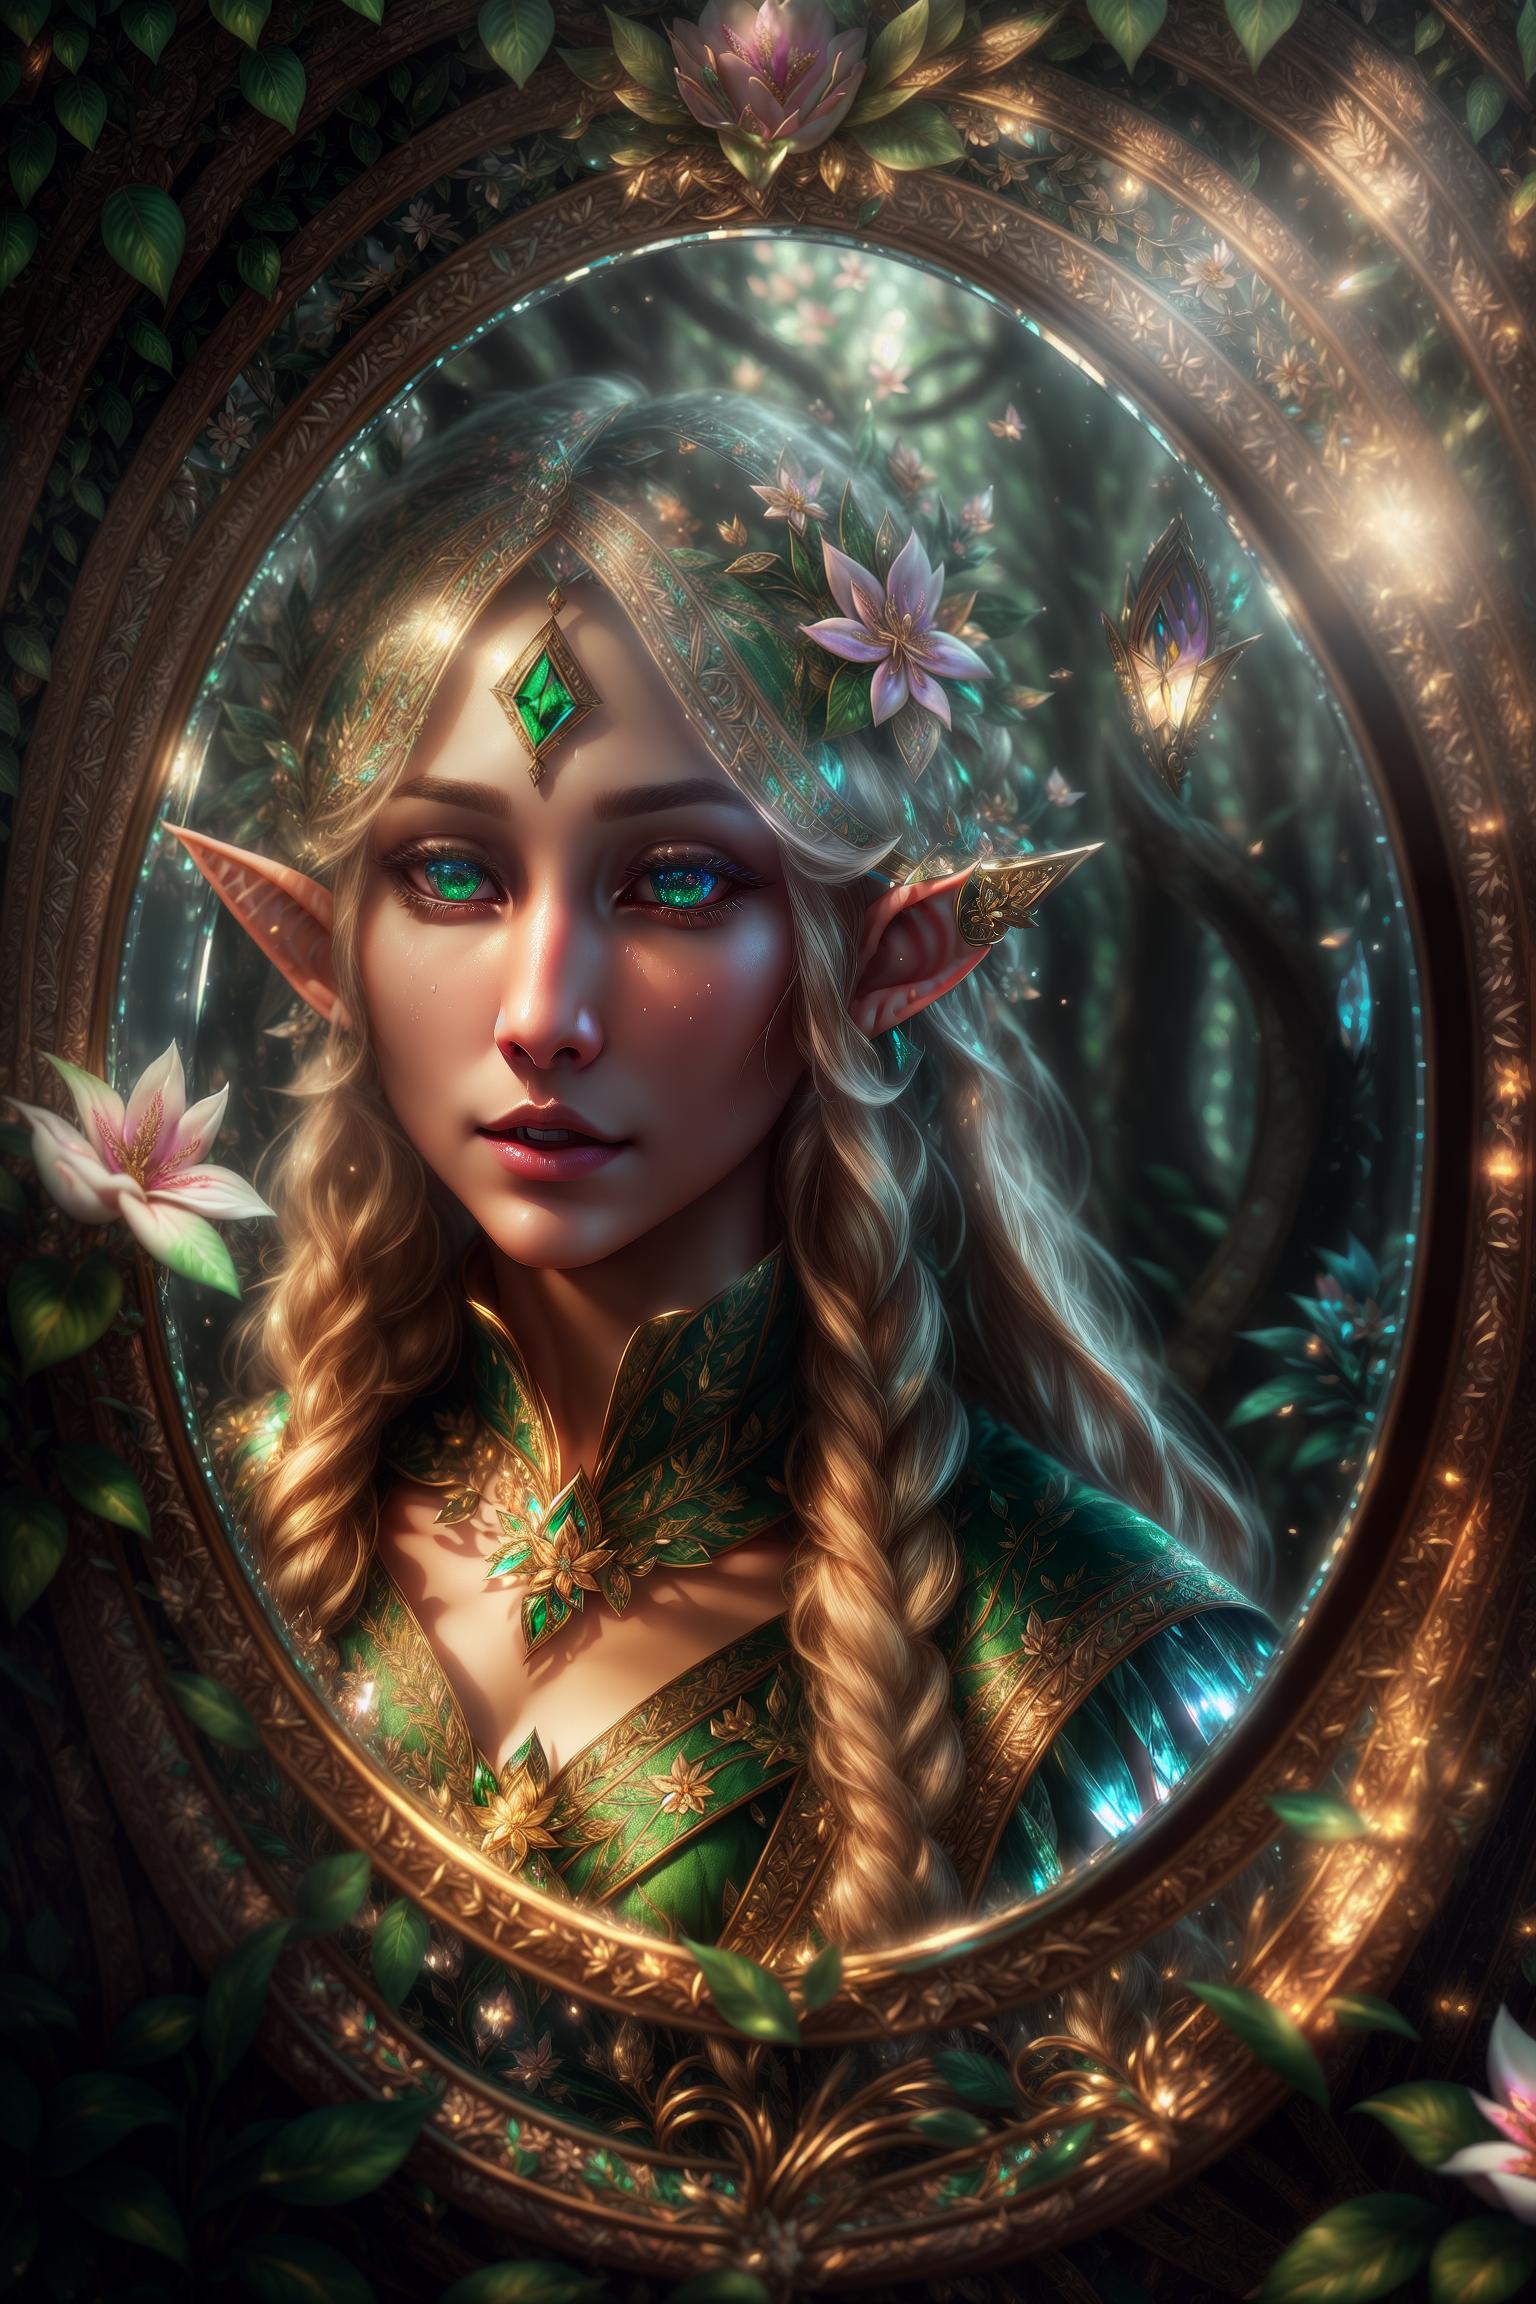  masterpiece,(bestquality),highlydetailed,(beautiful elf:1.5),(narcissistic expression:1.2),(lifedrain:1.3),{reflection in the mirror: trapped in the mirror:1.2},(ancient mirror:1.5),(attracted person:0.8),{dark environment: mysterious atmosphere:1.1},(mirror reflection:1.3),{elf elements: forest: mushrooms: flowers:1.2},(forest elements:1.5),(flower elements:1.5) hyperrealistic, full body, detailed clothing, highly detailed, cinematic lighting, stunningly beautiful, intricate, sharp focus, f/1. 8, 85mm, (centered image composition), (professionally color graded), ((bright soft diffused light)), volumetric fog, trending on instagram, trending on tumblr, HDR 4K, 8K